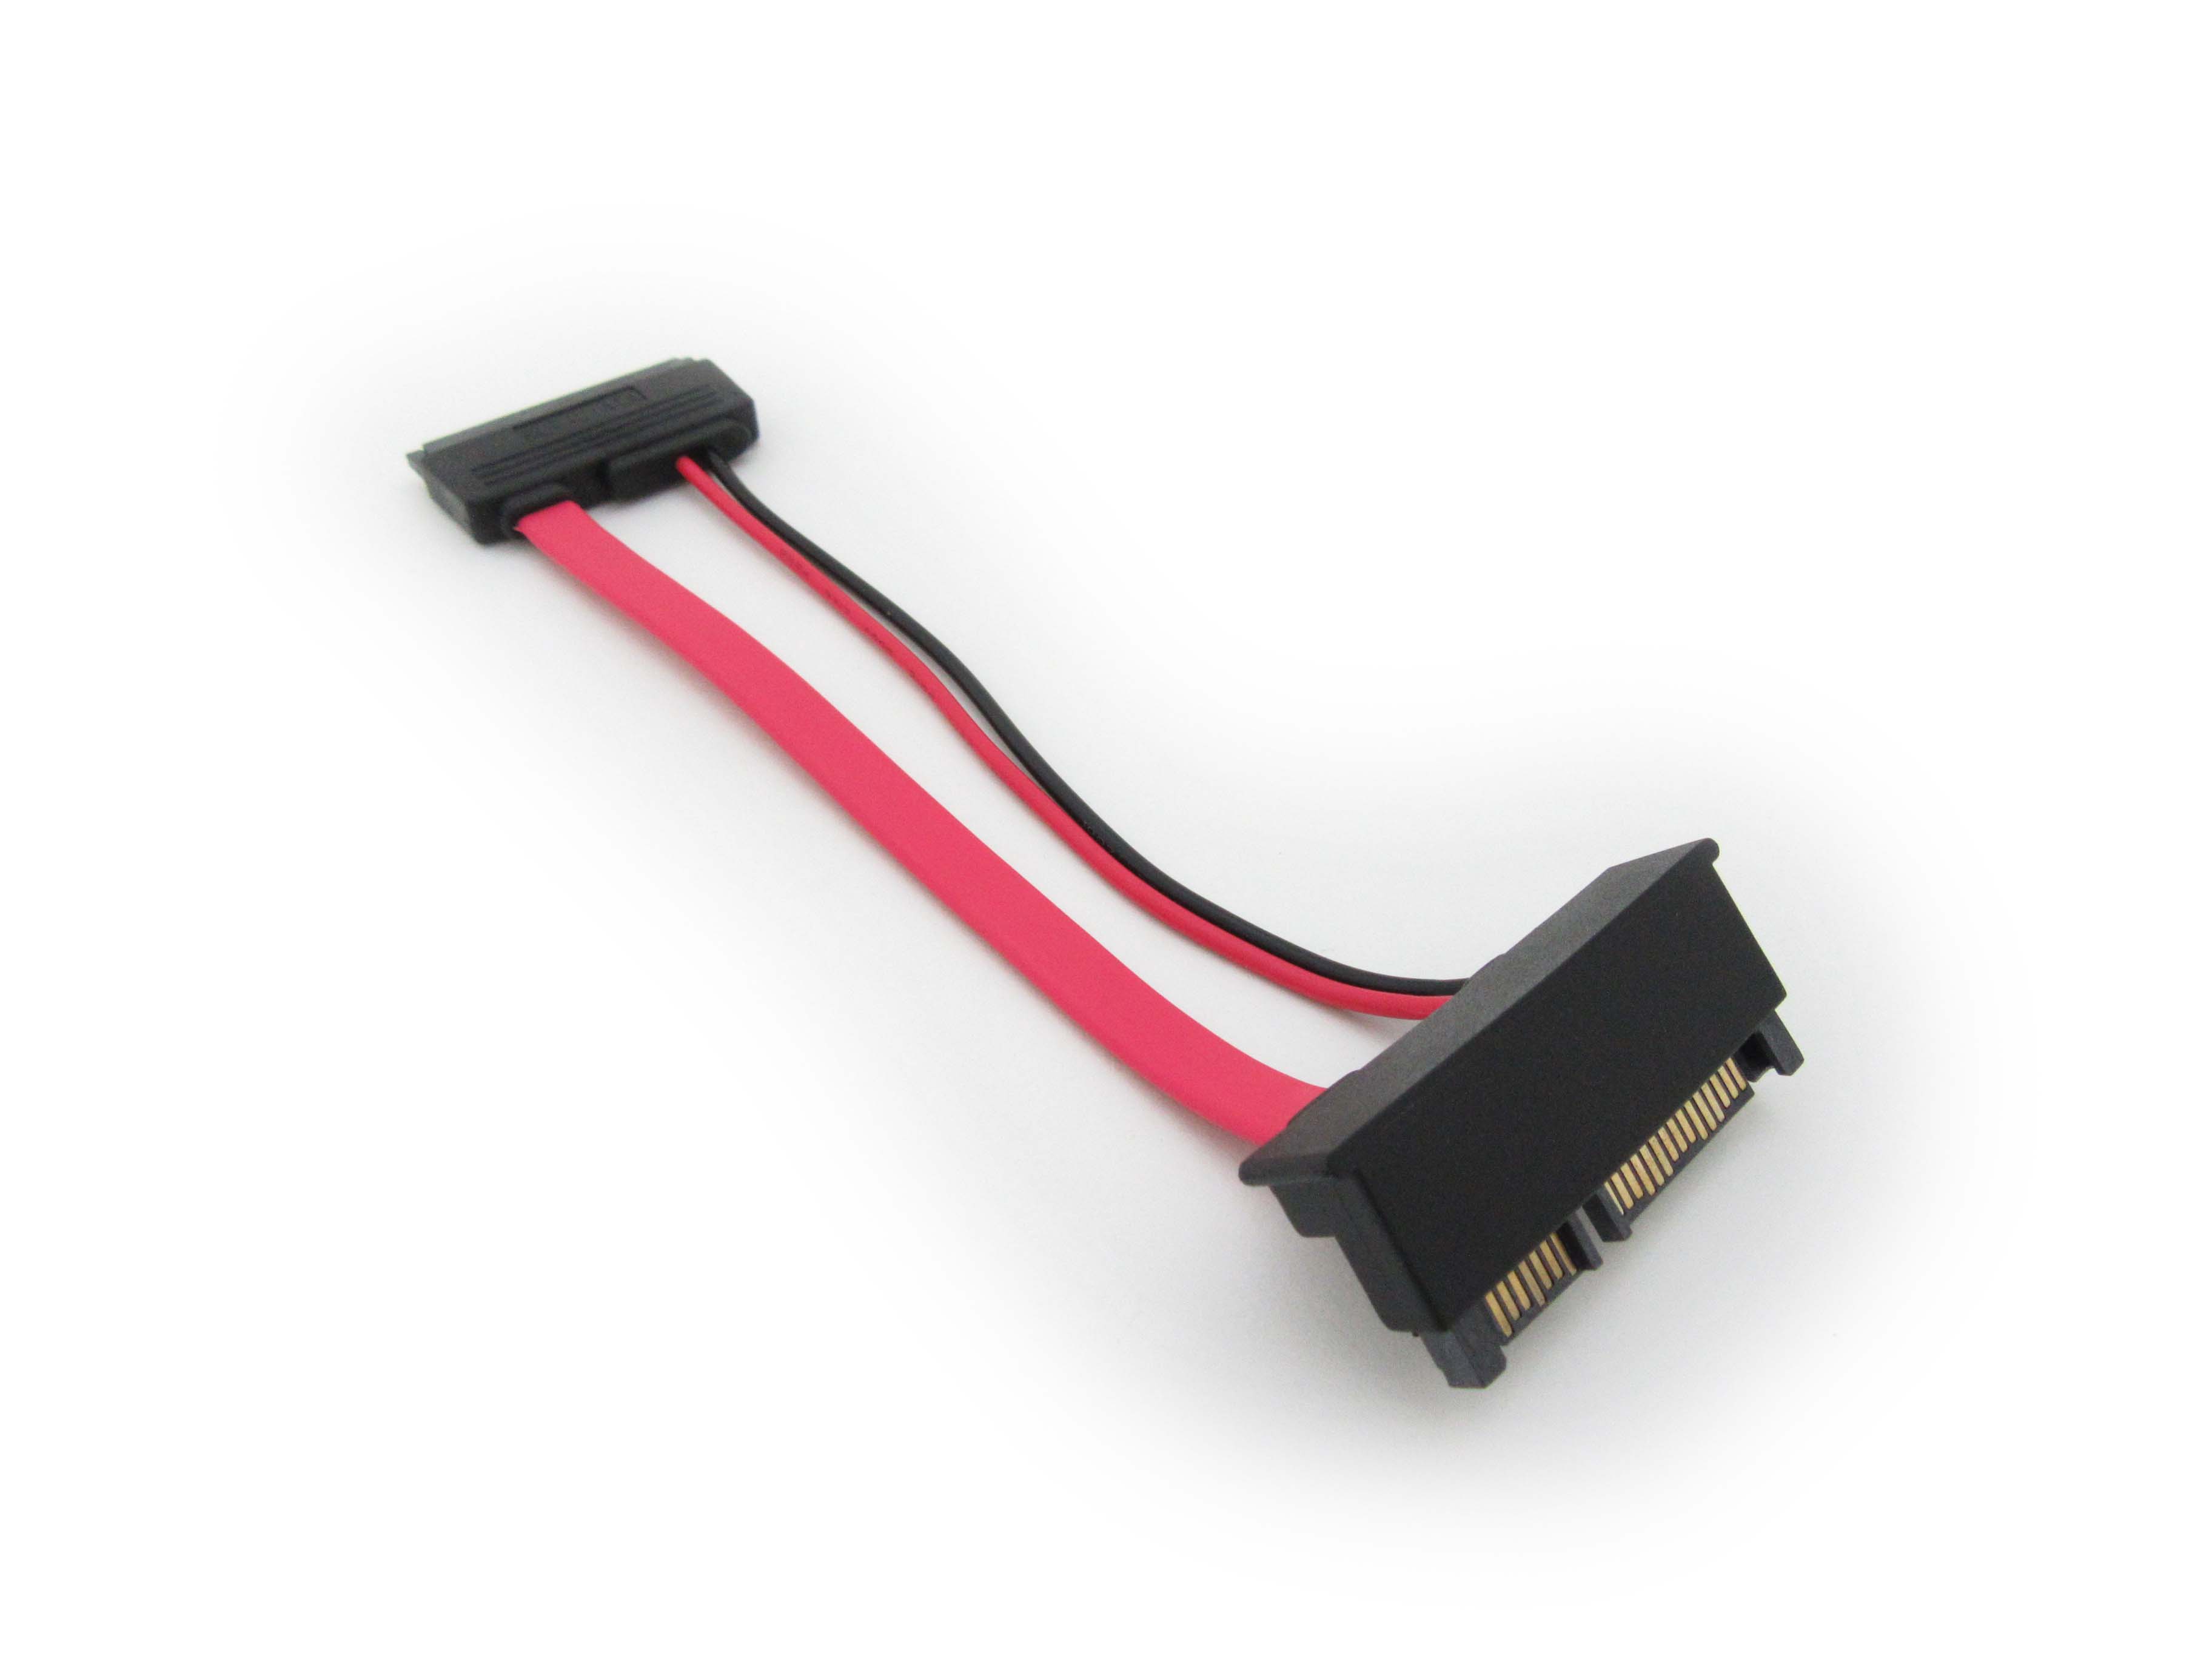 SATA 22pin Extension Cable